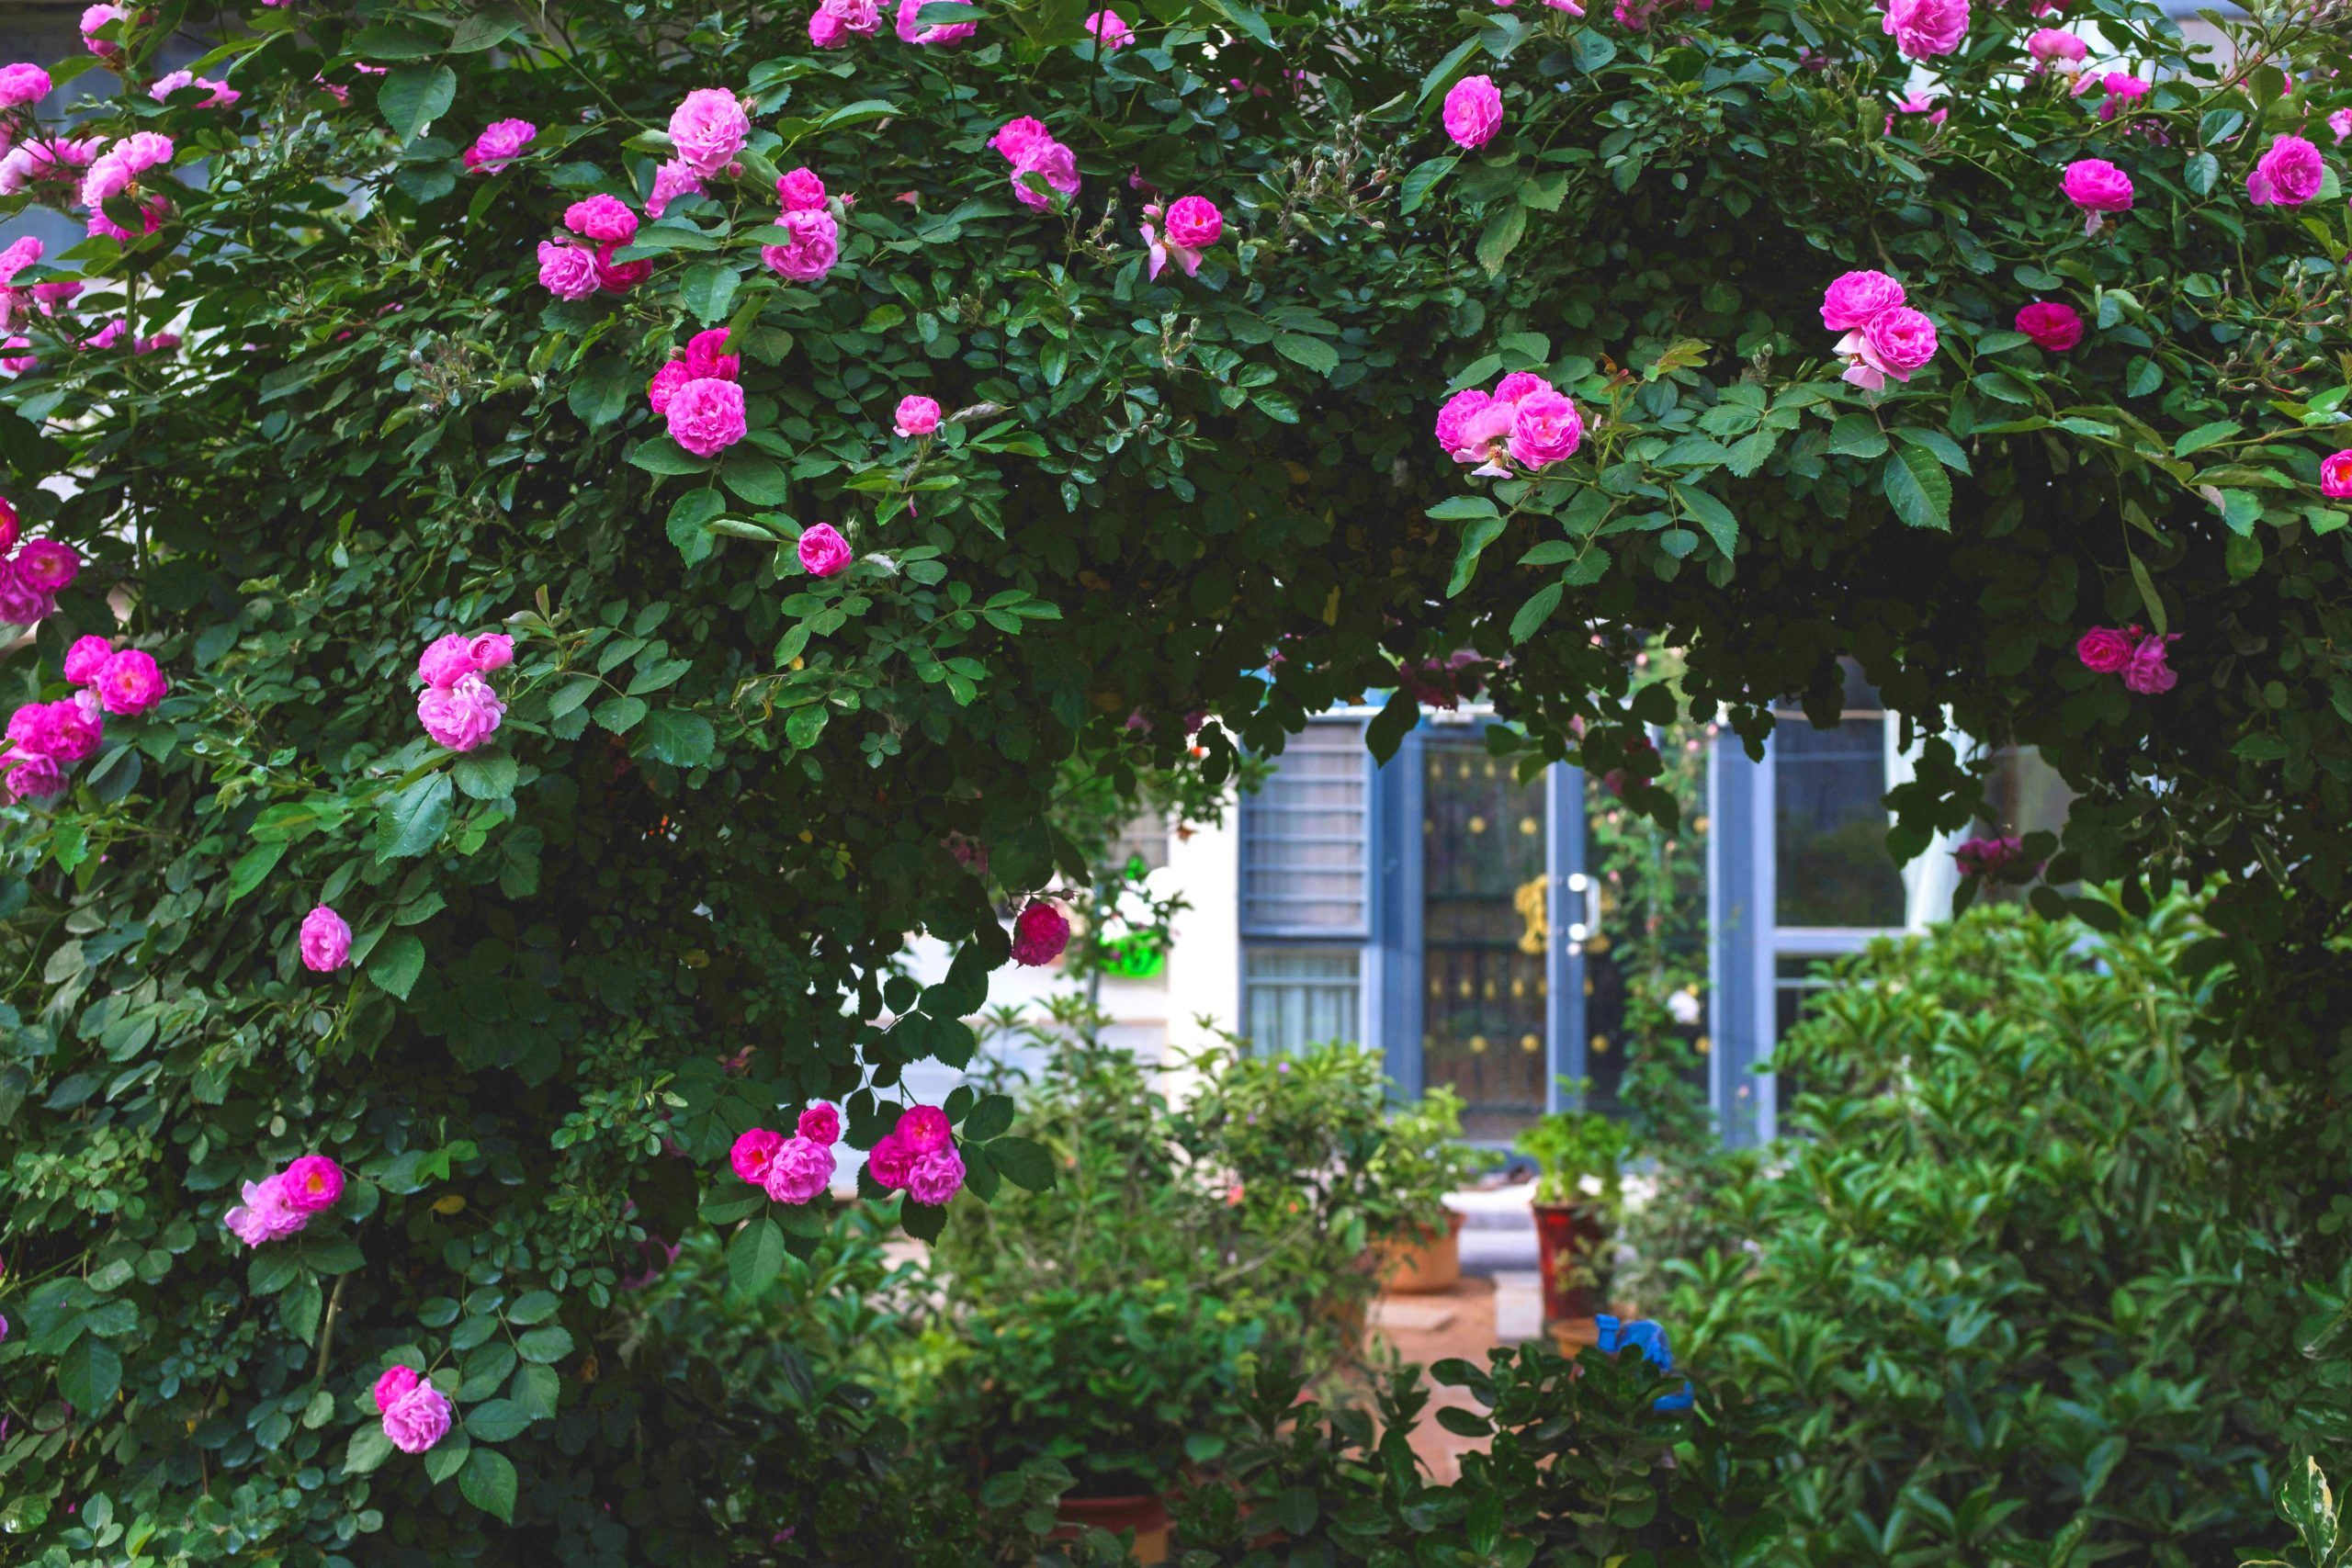 Roses and flower pots in garden next to house